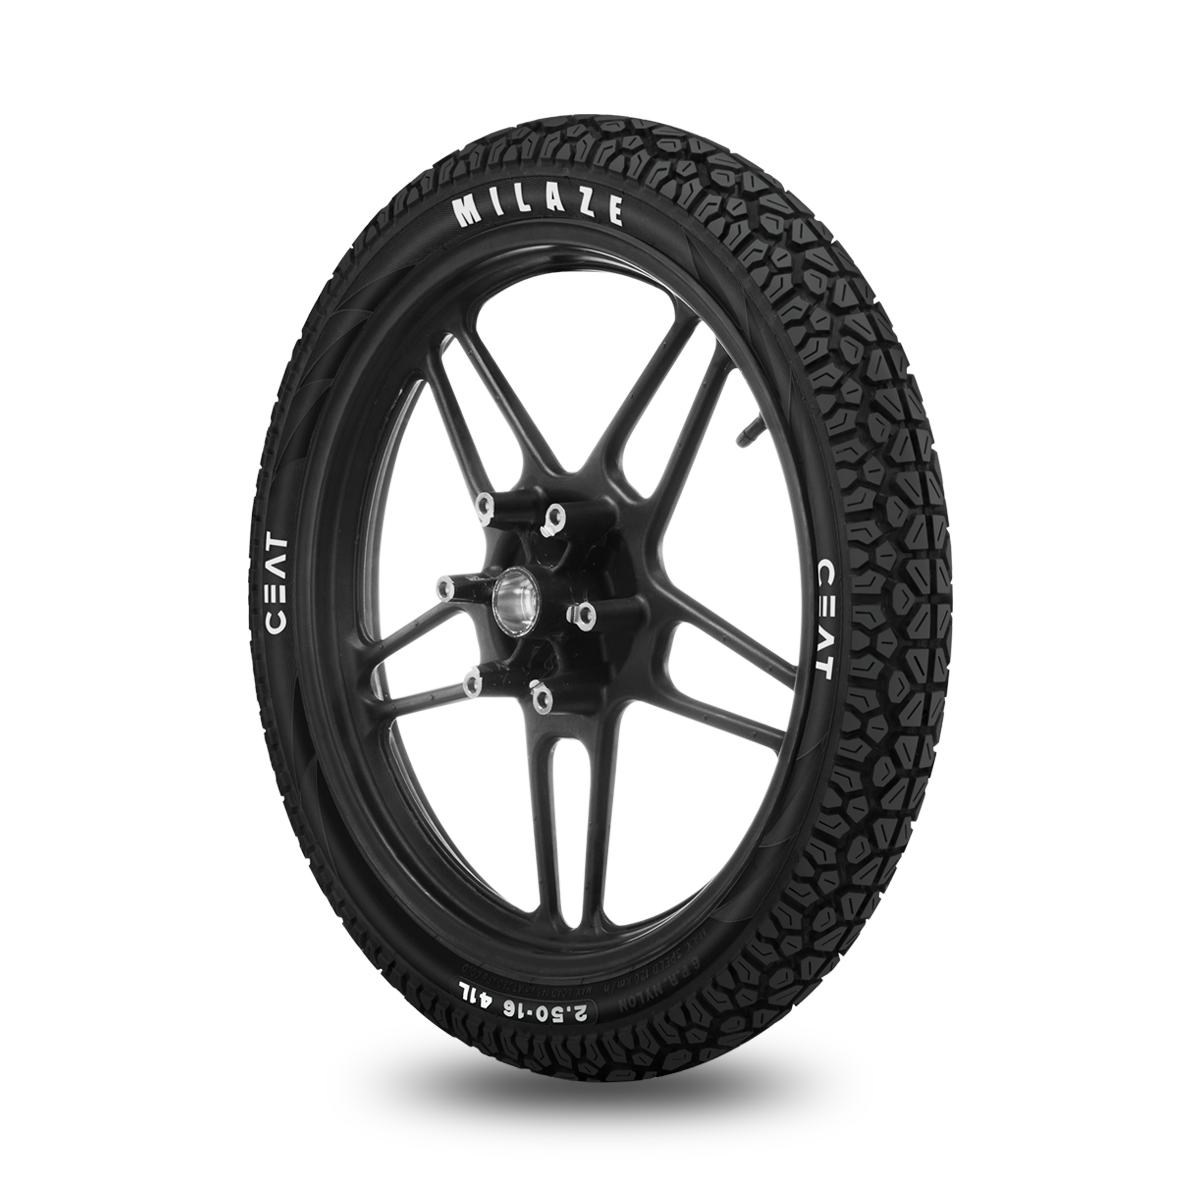 . Hdpng.com Milaze3(Motorcycle).png Hdpng.com  - Bike Tyre, Transparent background PNG HD thumbnail